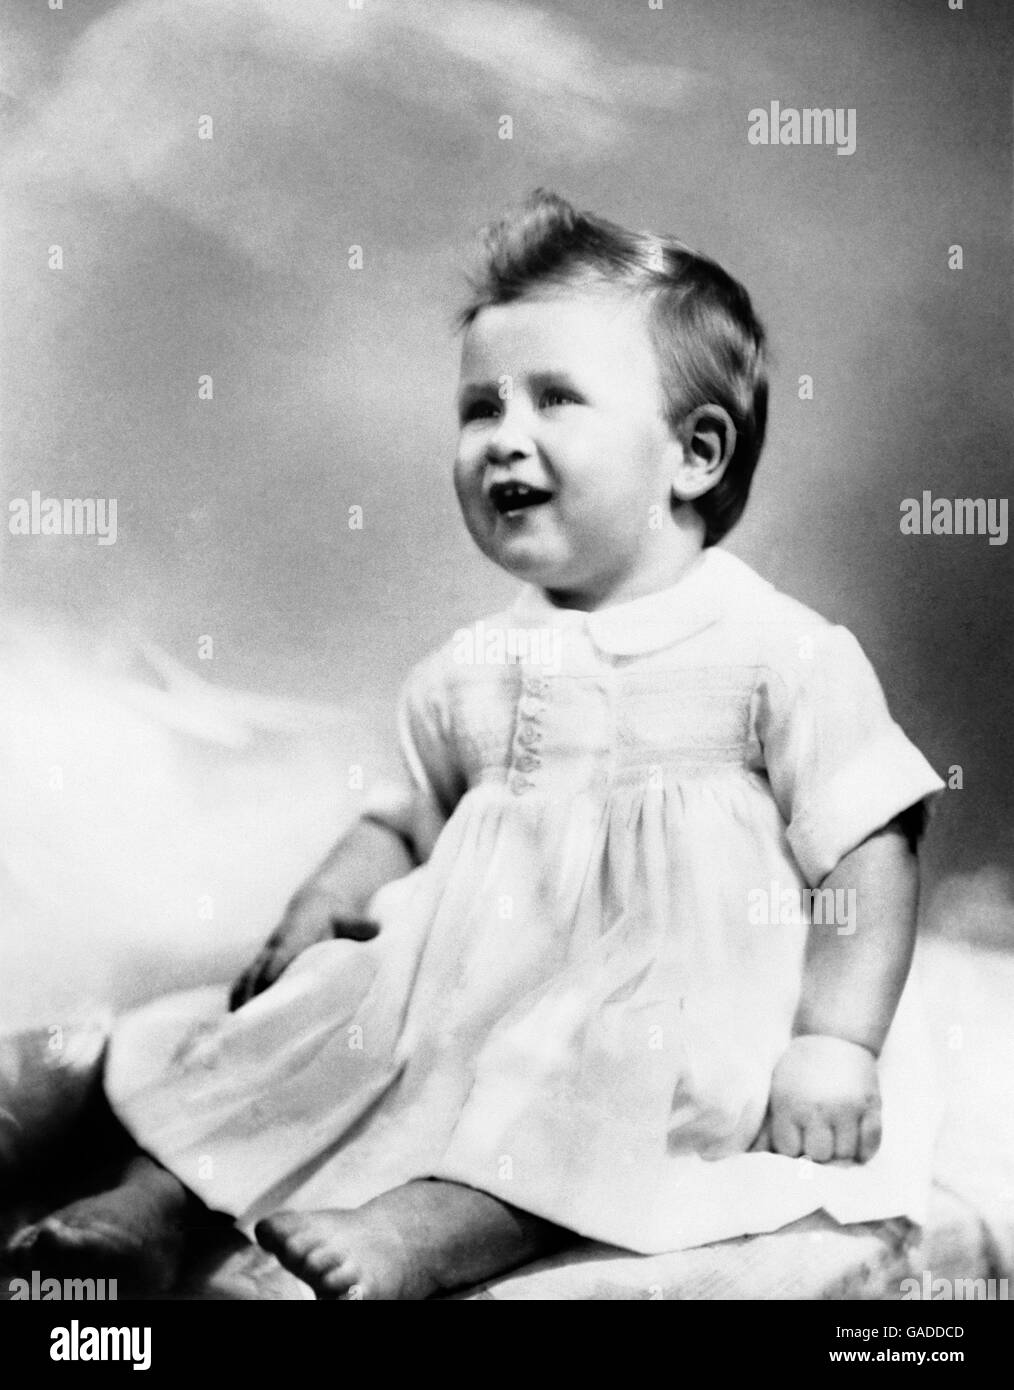 Prince Charles son of Princess Elizabeth and the Duke of Edinburgh, was taken for his 1st birthday. At 11 1/2 months the baby prince weighed 24 1/2 lbs and had 6 teeth and could walk a few steps holding onto his play pen. Stock Photo